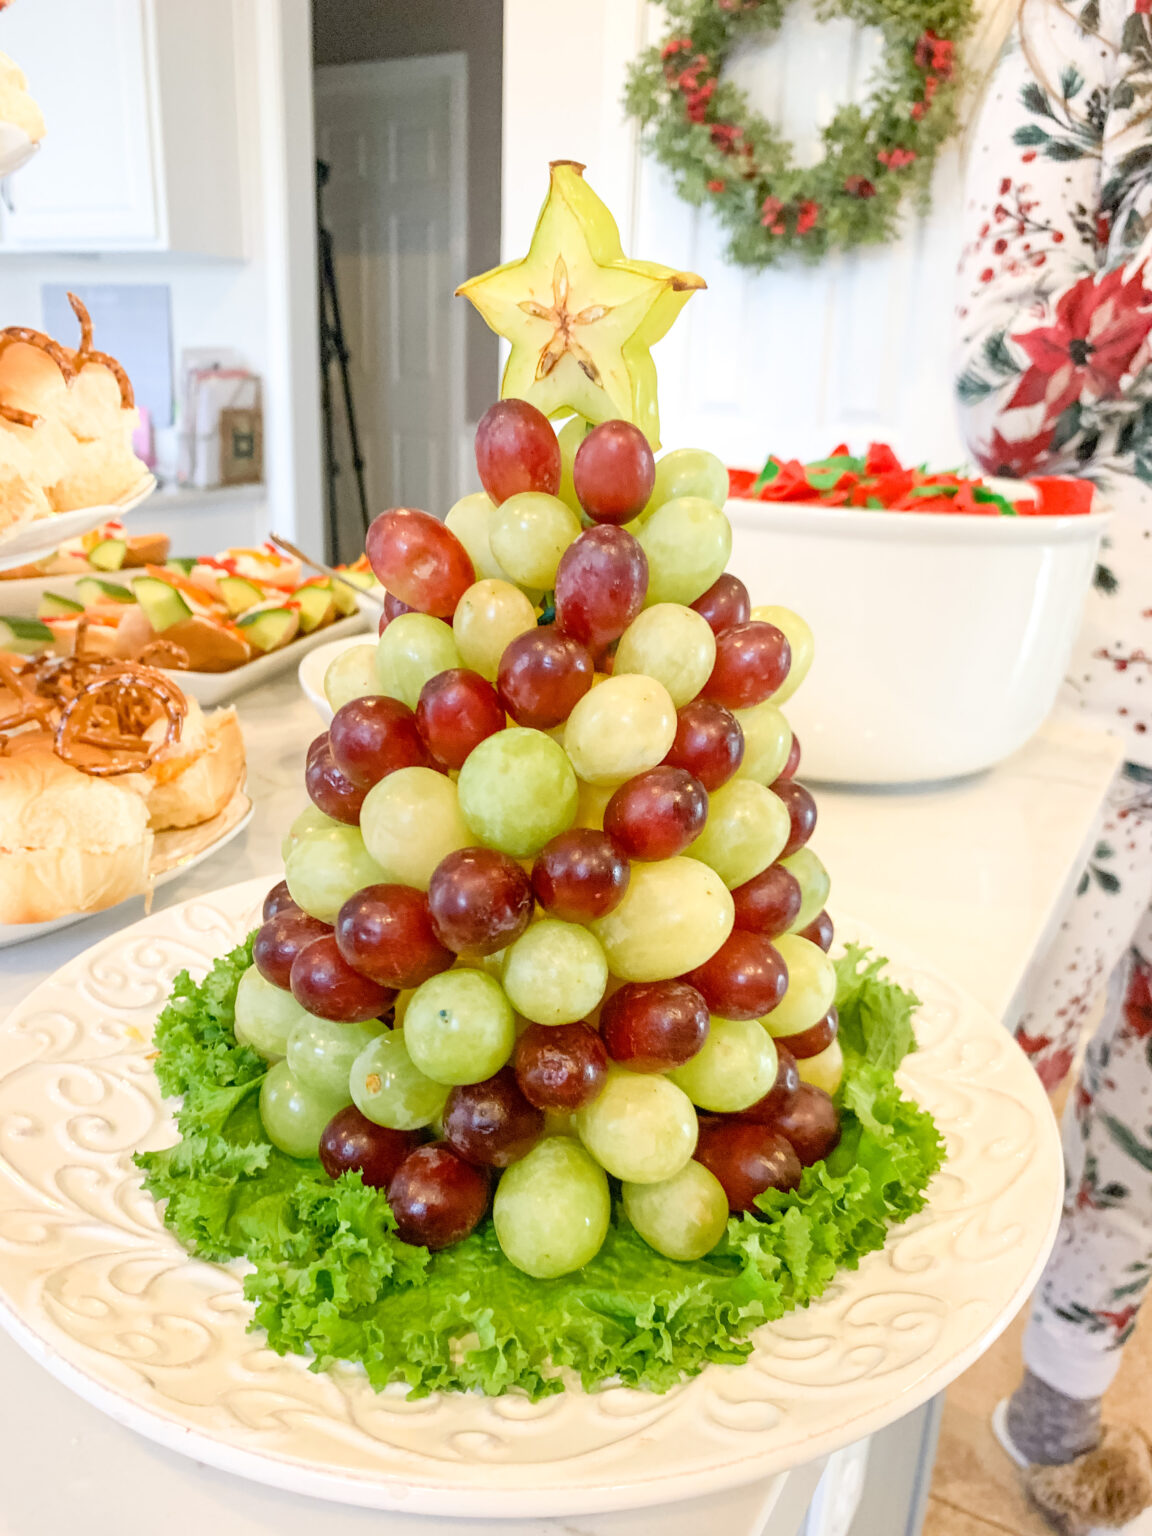 HOLIDAY HOMEMAKING W/ ME! | CHRISTMAS PARTY FOOD IDEAS